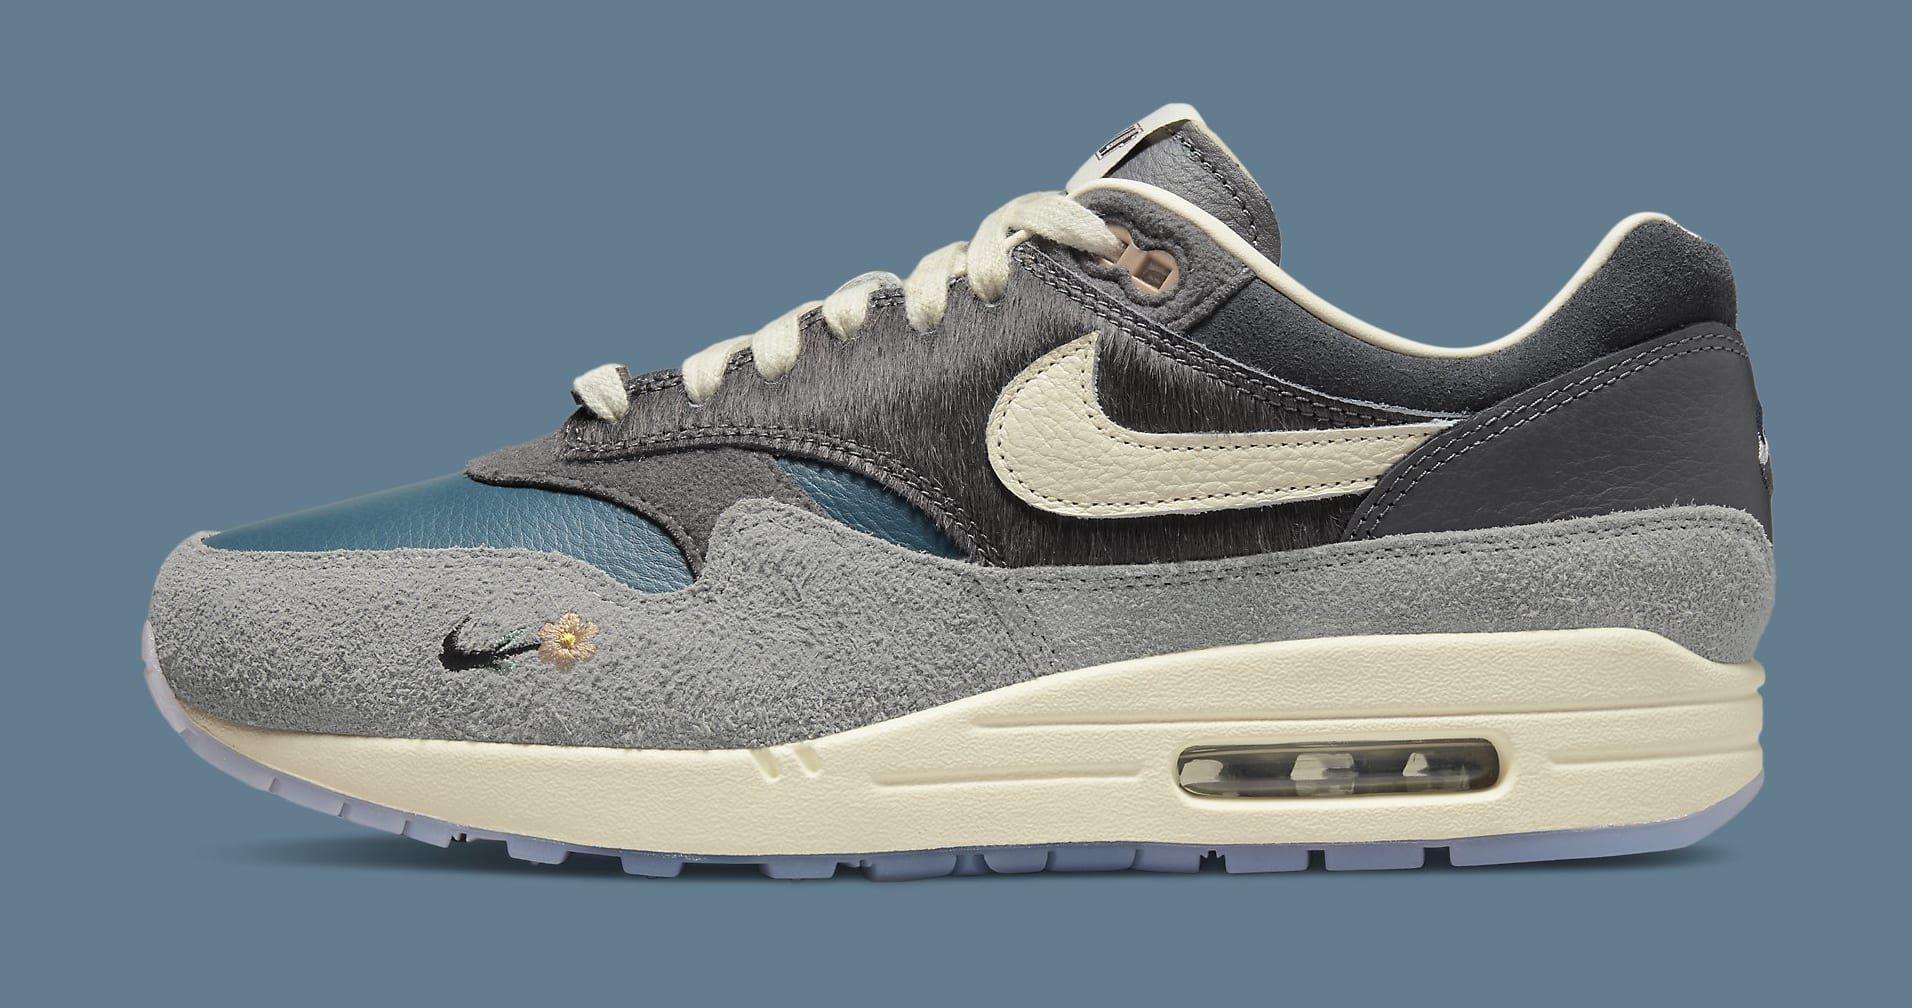 Kasina's Nike Air Max 1 Collabs Get an Official Release Date | Complex